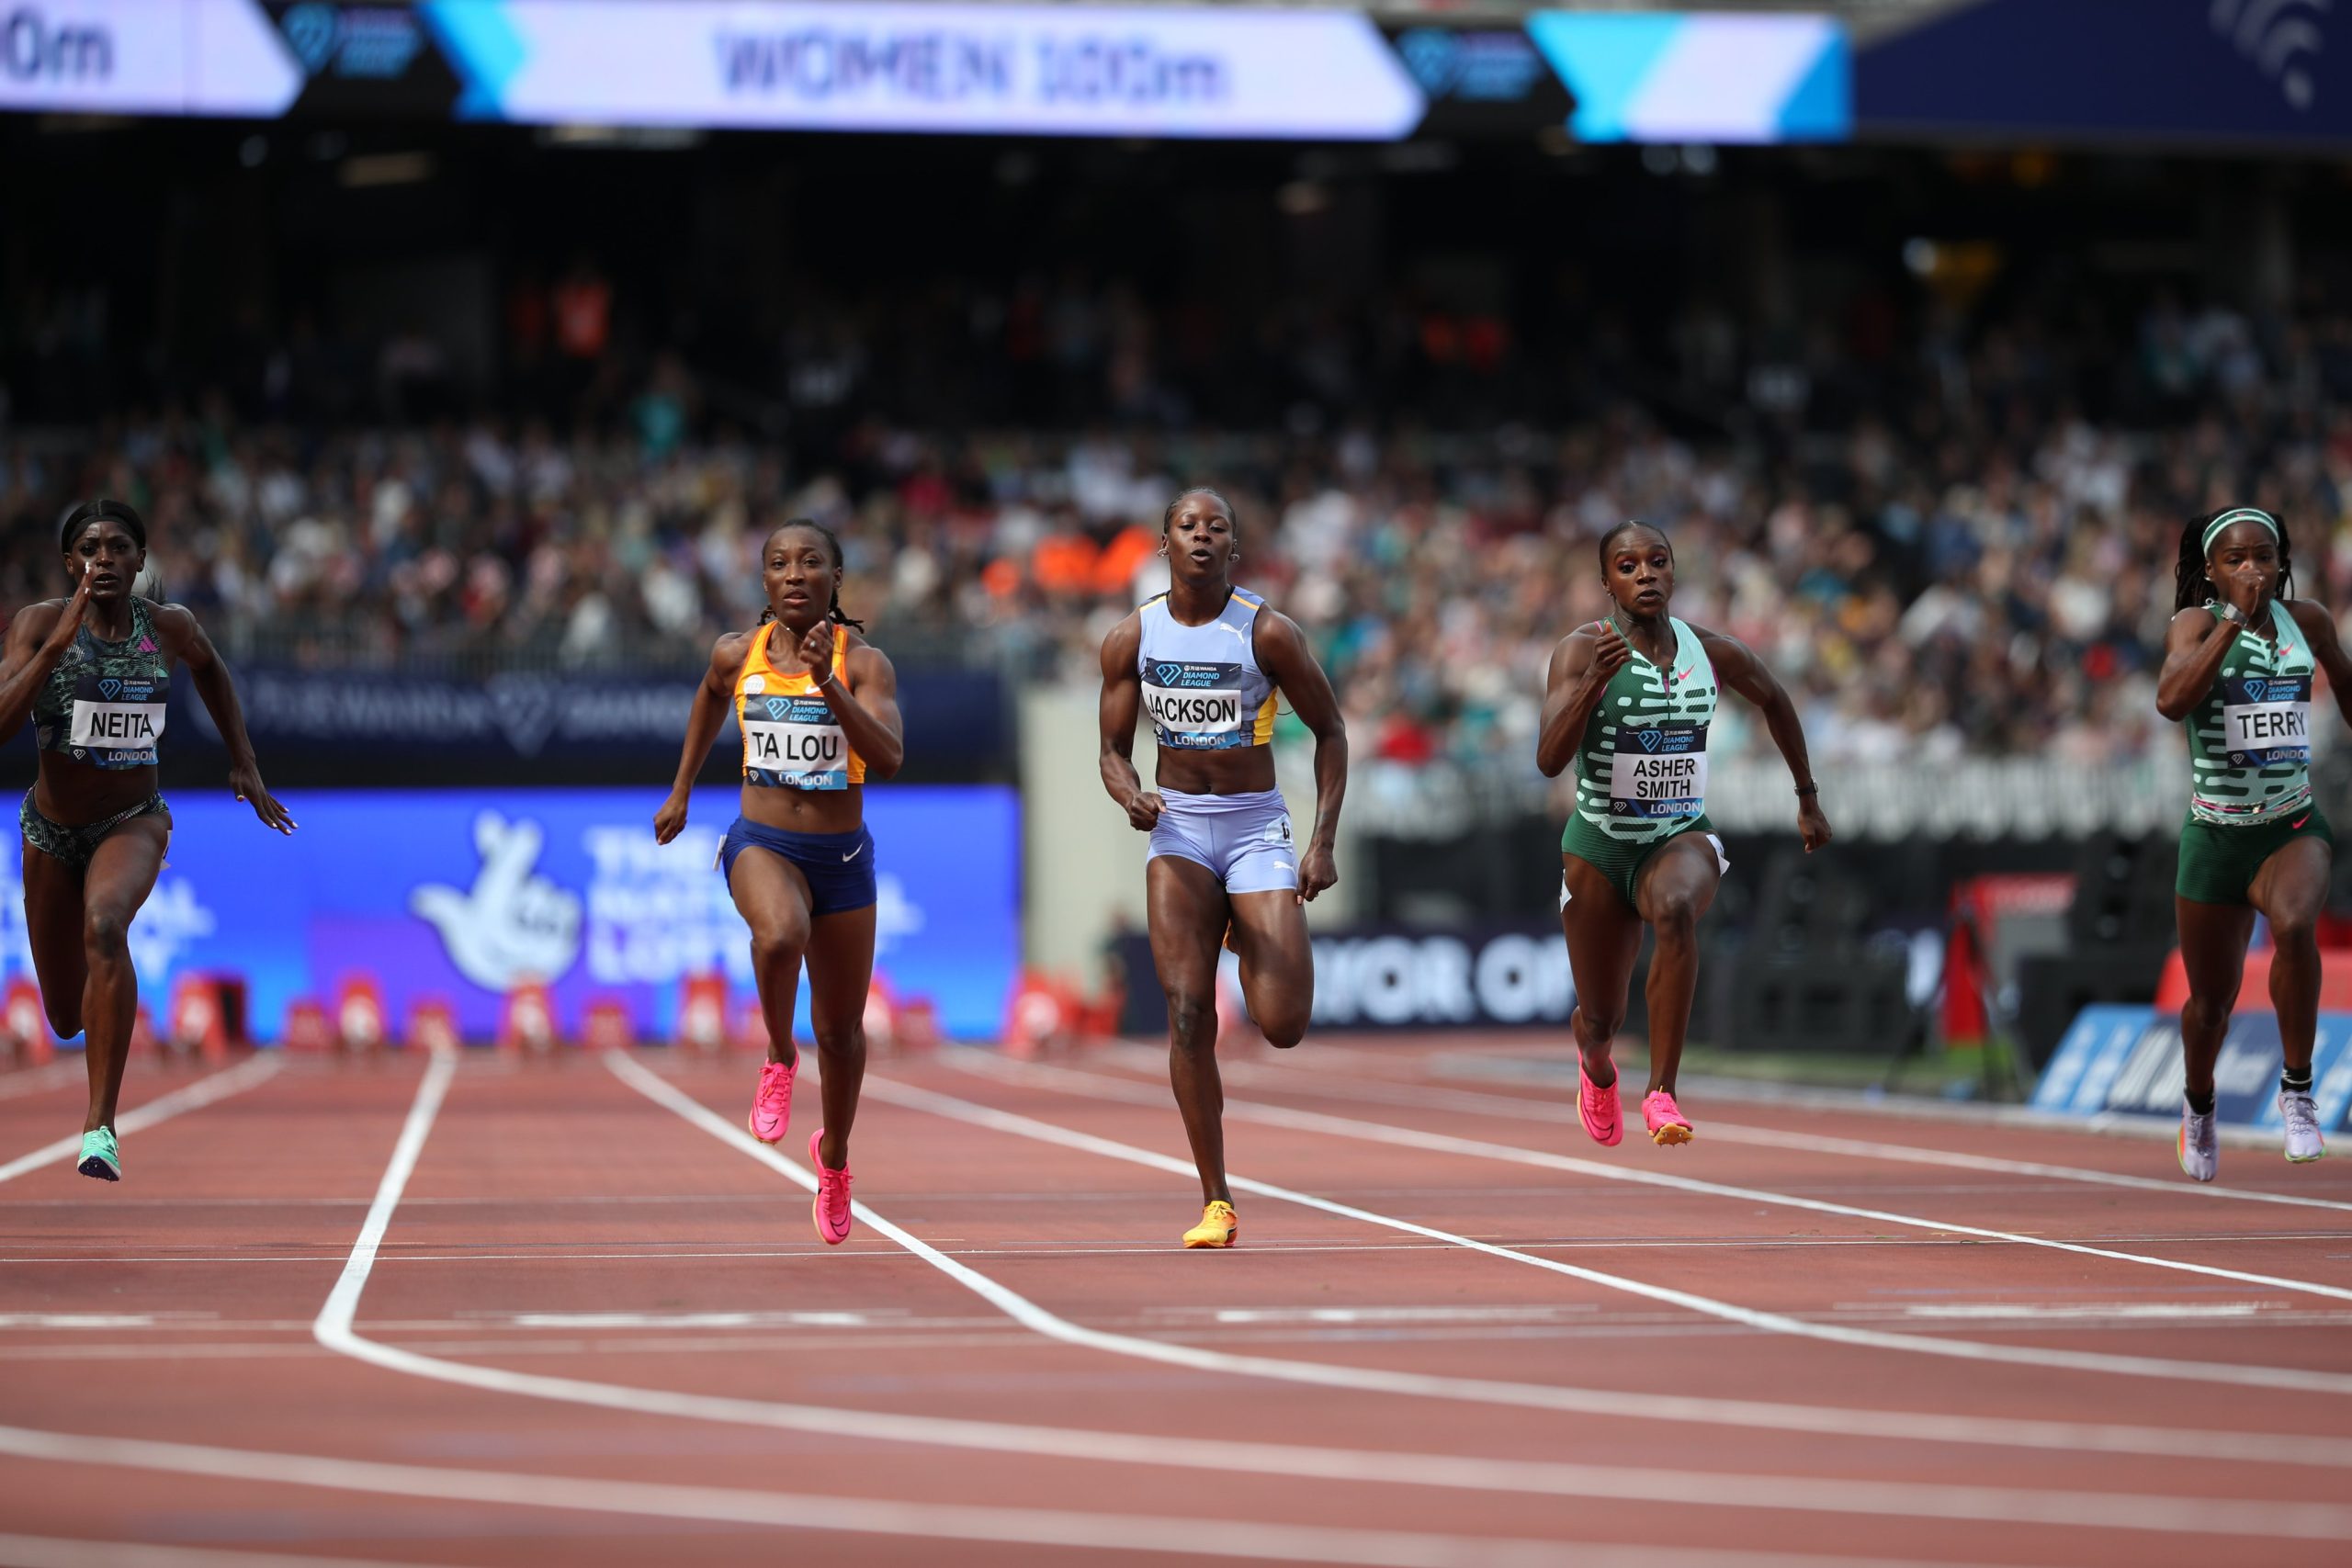 Marie-Josée TA LOU beats Shericka Jackson, who opted for a relaxed approach, as Sha'Carrie Richardson fails to show at London DL